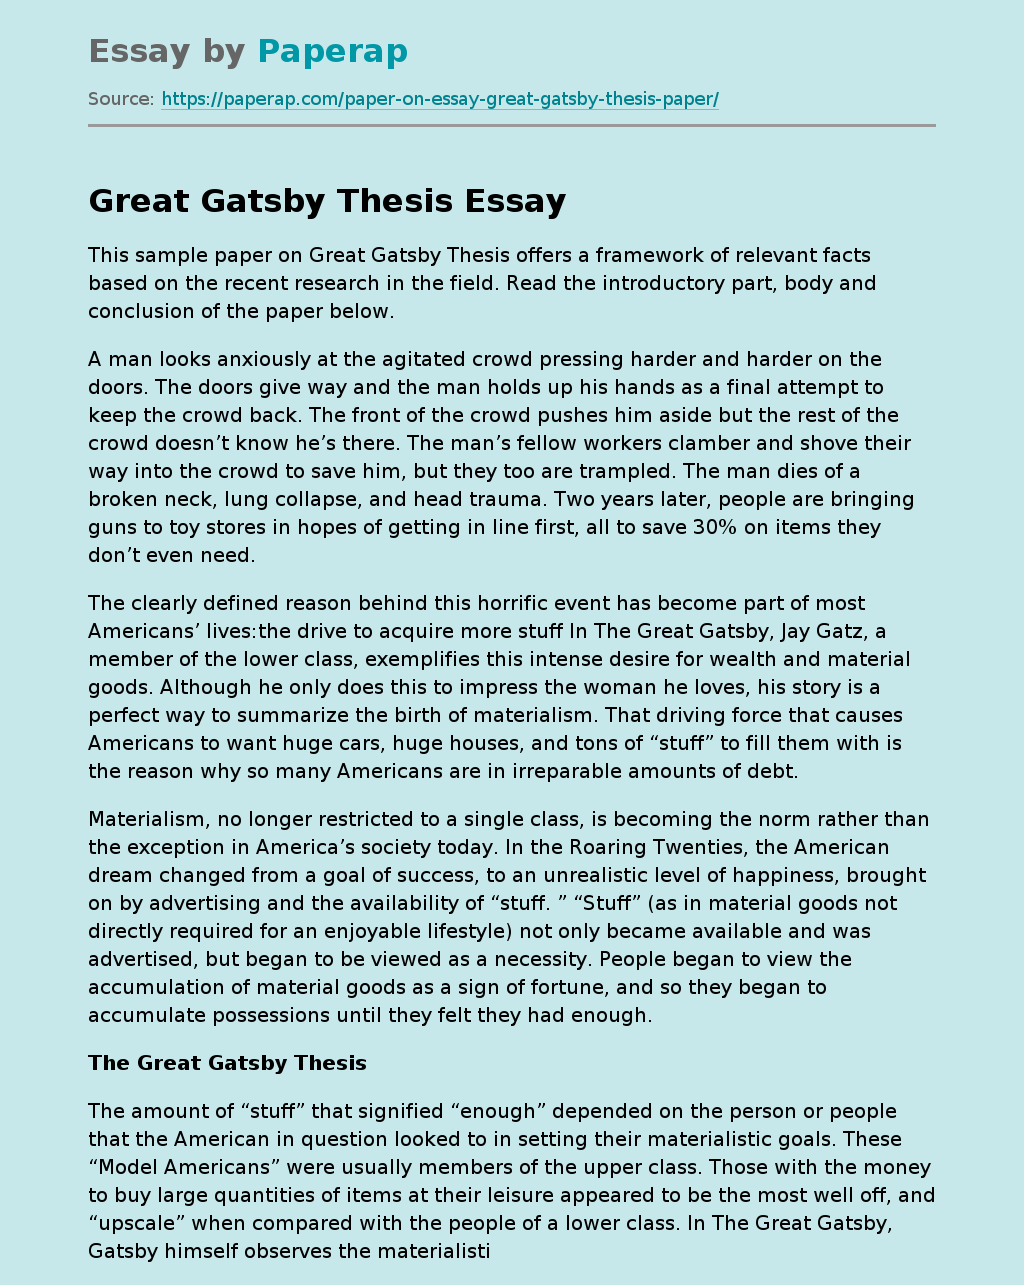 Great Gatsby Thesis